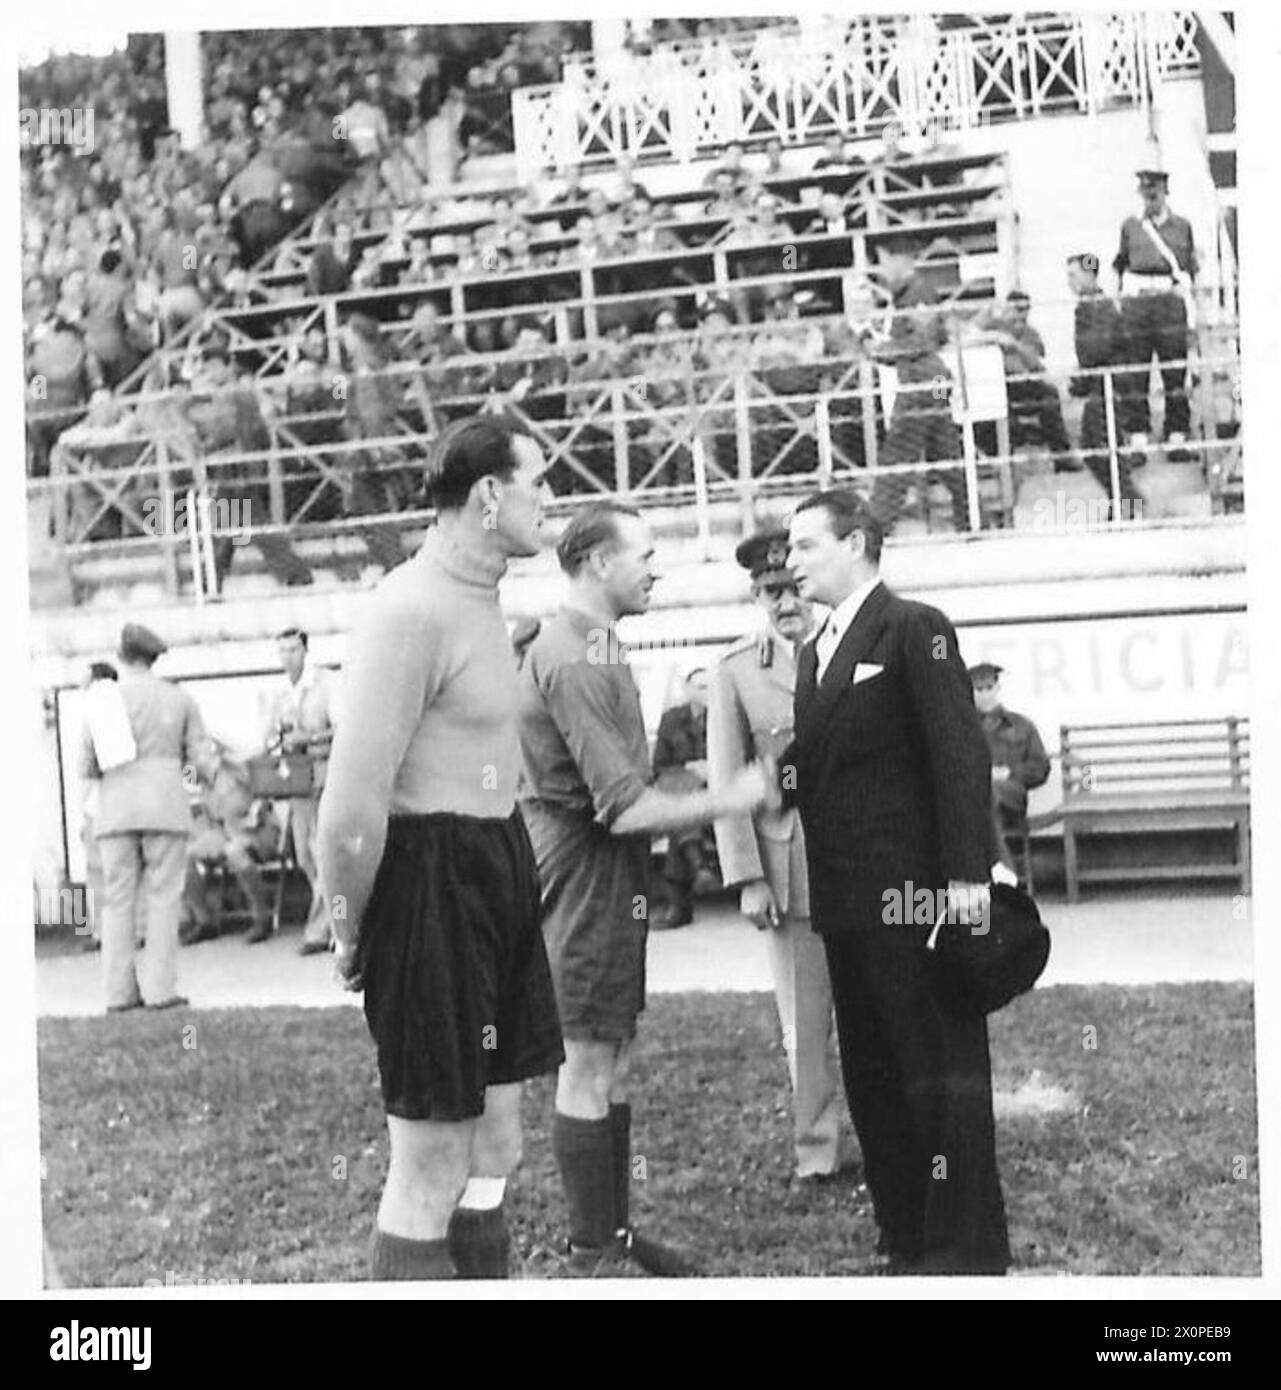 WEEK-END SPORT IN C.M.F. - Sir Noel Charles, British Ambassador, is introduced to the captain of the United Kingdom team - CSM (I) Busby of Liverpool and England. Photographic negative , British Army Stock Photo